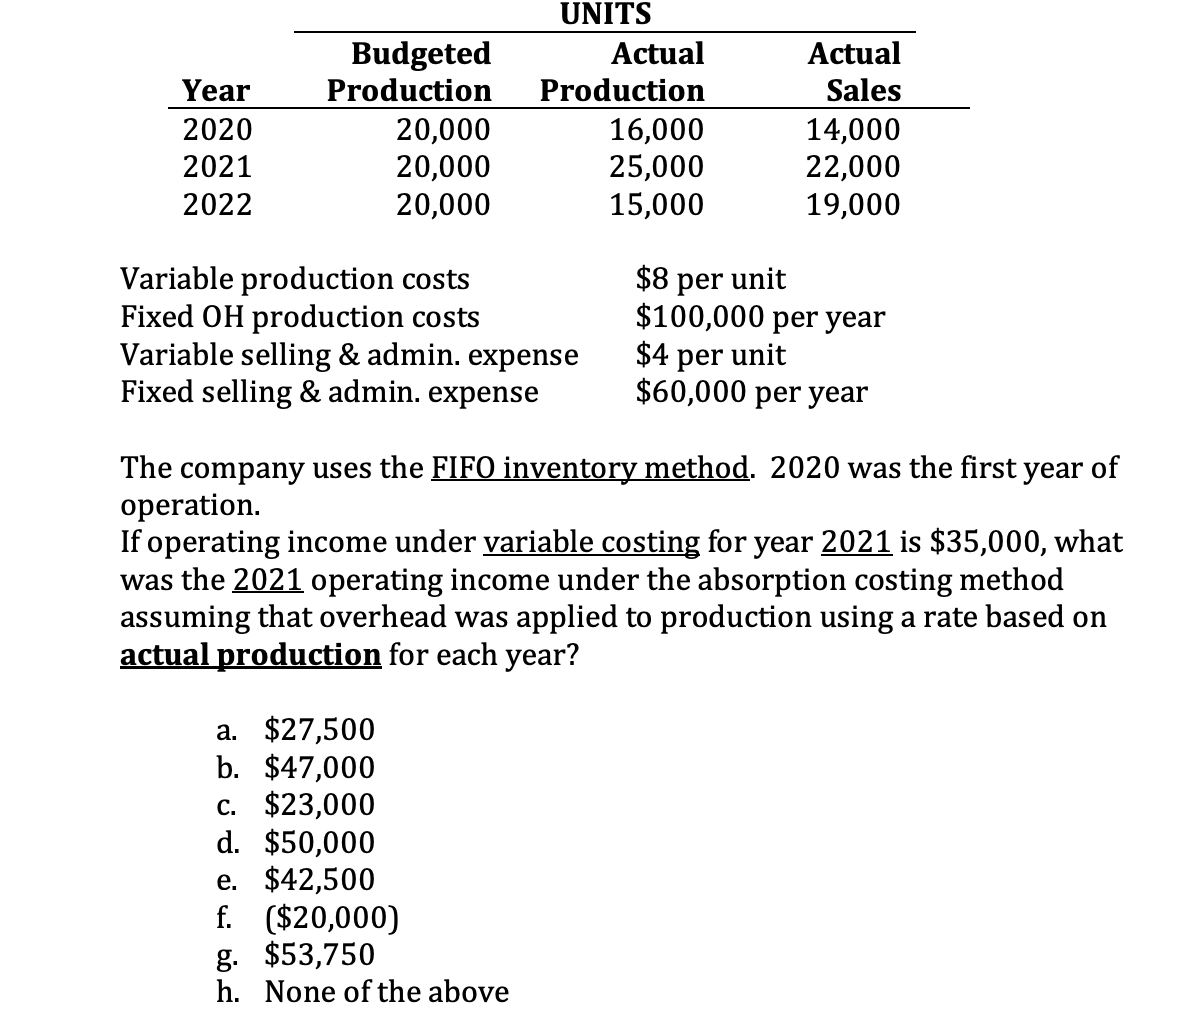 Year
2020
2021
2022
Budgeted
Production
20,000
20,000
20,000
a. $27,500
b. $47,000
UNITS
Variable production costs
Fixed OH production costs
Variable selling & admin. expense
Fixed selling & admin. expense
Actual
Production
16,000
25,000
15,000
c. $23,000
d. $50,000
e. $42,500
f. ($20,000)
g. $53,750
h. None of the above
Actual
Sales
14,000
22,000
19,000
The company uses the FIFO inventory method. 2020 was the first year of
operation.
If operating income under variable costing for year 2021 is $35,000, what
was the 2021 operating income under the absorption costing method
assuming that overhead was applied to production using a rate based on
actual production for each year?
$8 per unit
$100,000 per year
$4 per unit
$60,000 per year